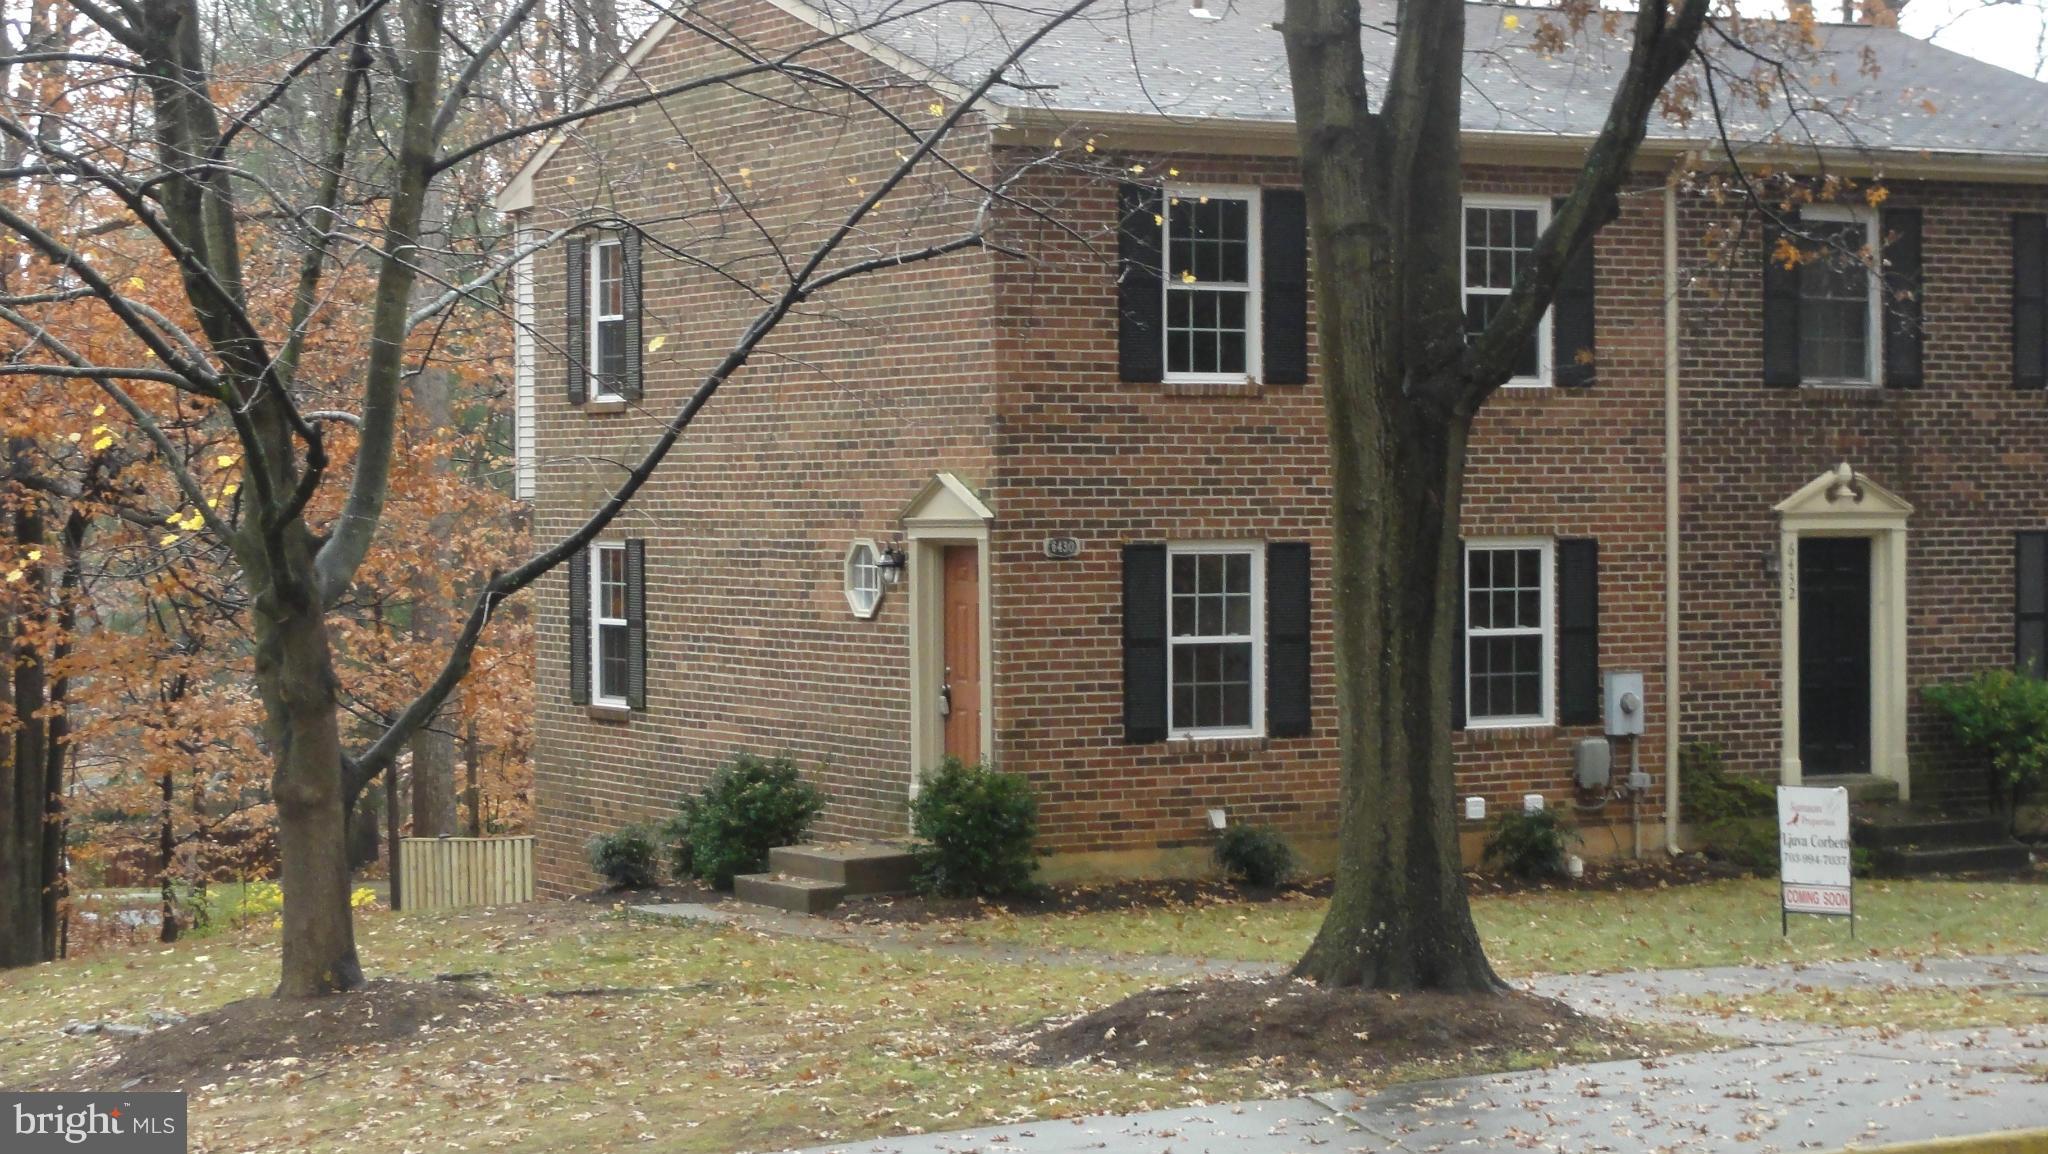 a view of a brick house with large windows and large tree